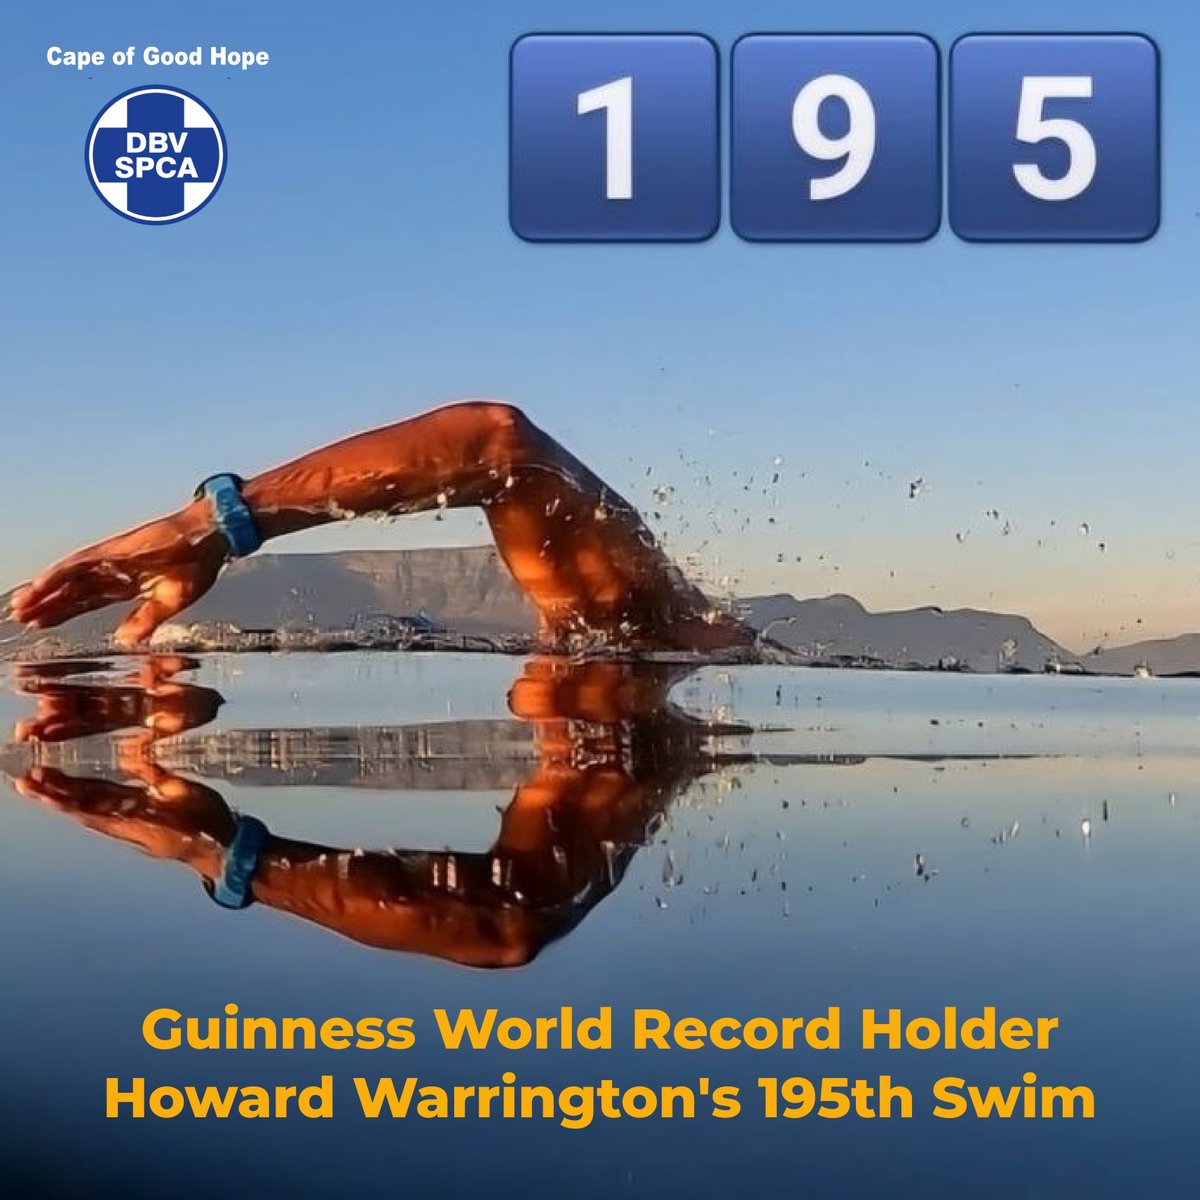 🏊🏼 Guinness World Record holder and endurance swimmer Howard Warrington has completed his 195th 7.4 KM swim from Robben Island to Blouberg 👇 pulse.ly/bdab9ek8tp #Swim4Survival2024 #HowardWarrington #SwimRecord #EnduranceSwimmer #RobbenIslandtoBlouberg #CapeSPCA #CapeTown